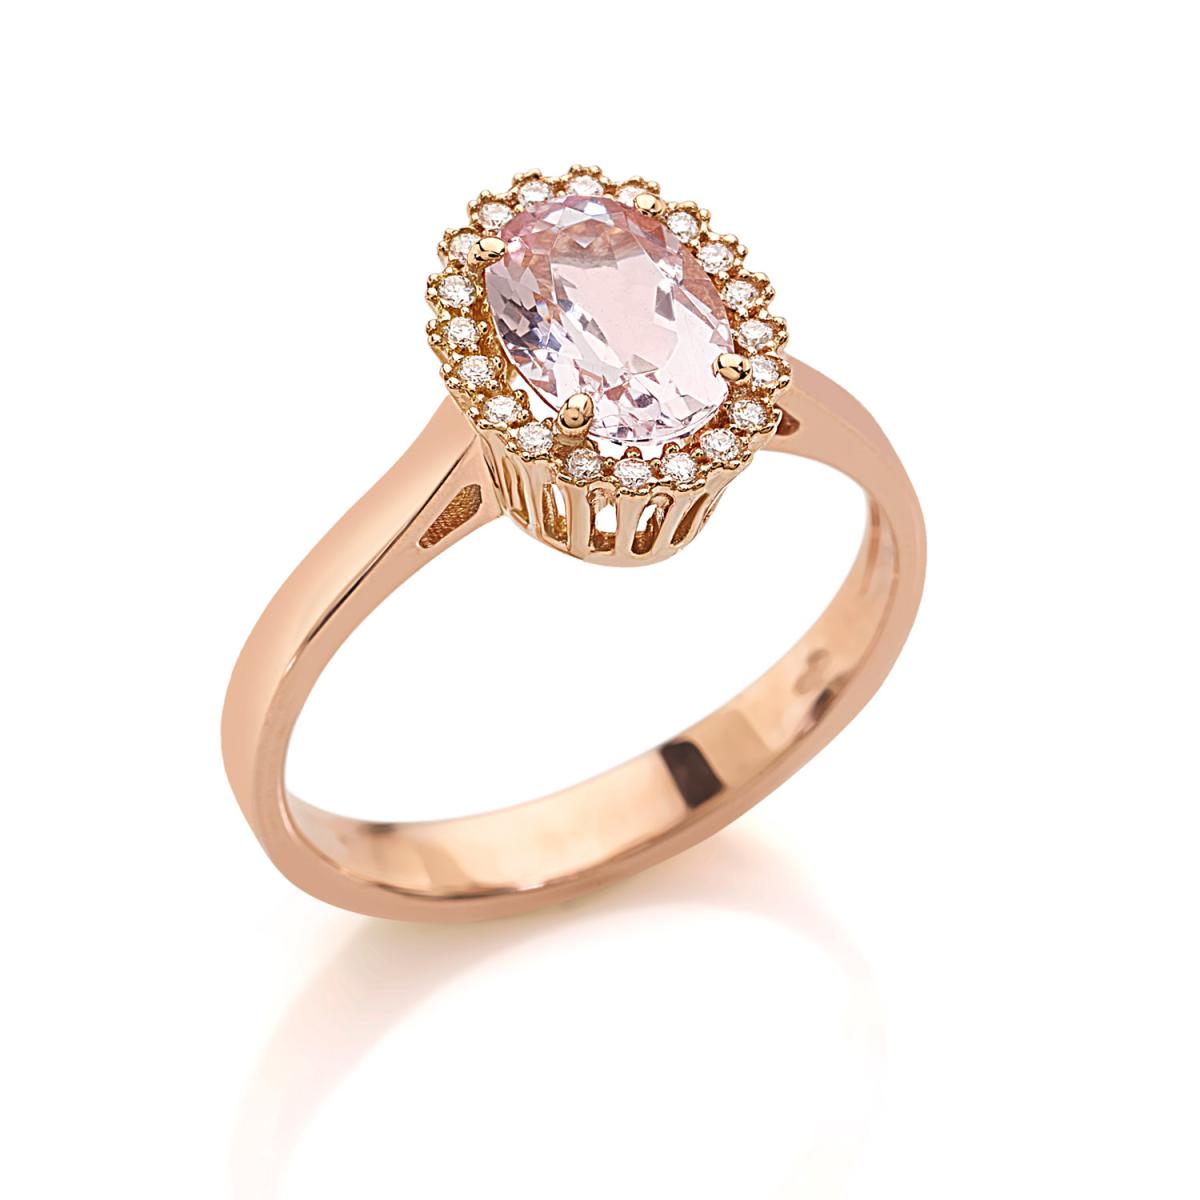 18kt gold ring with Morganite and diamonds - AD709/MO-LR